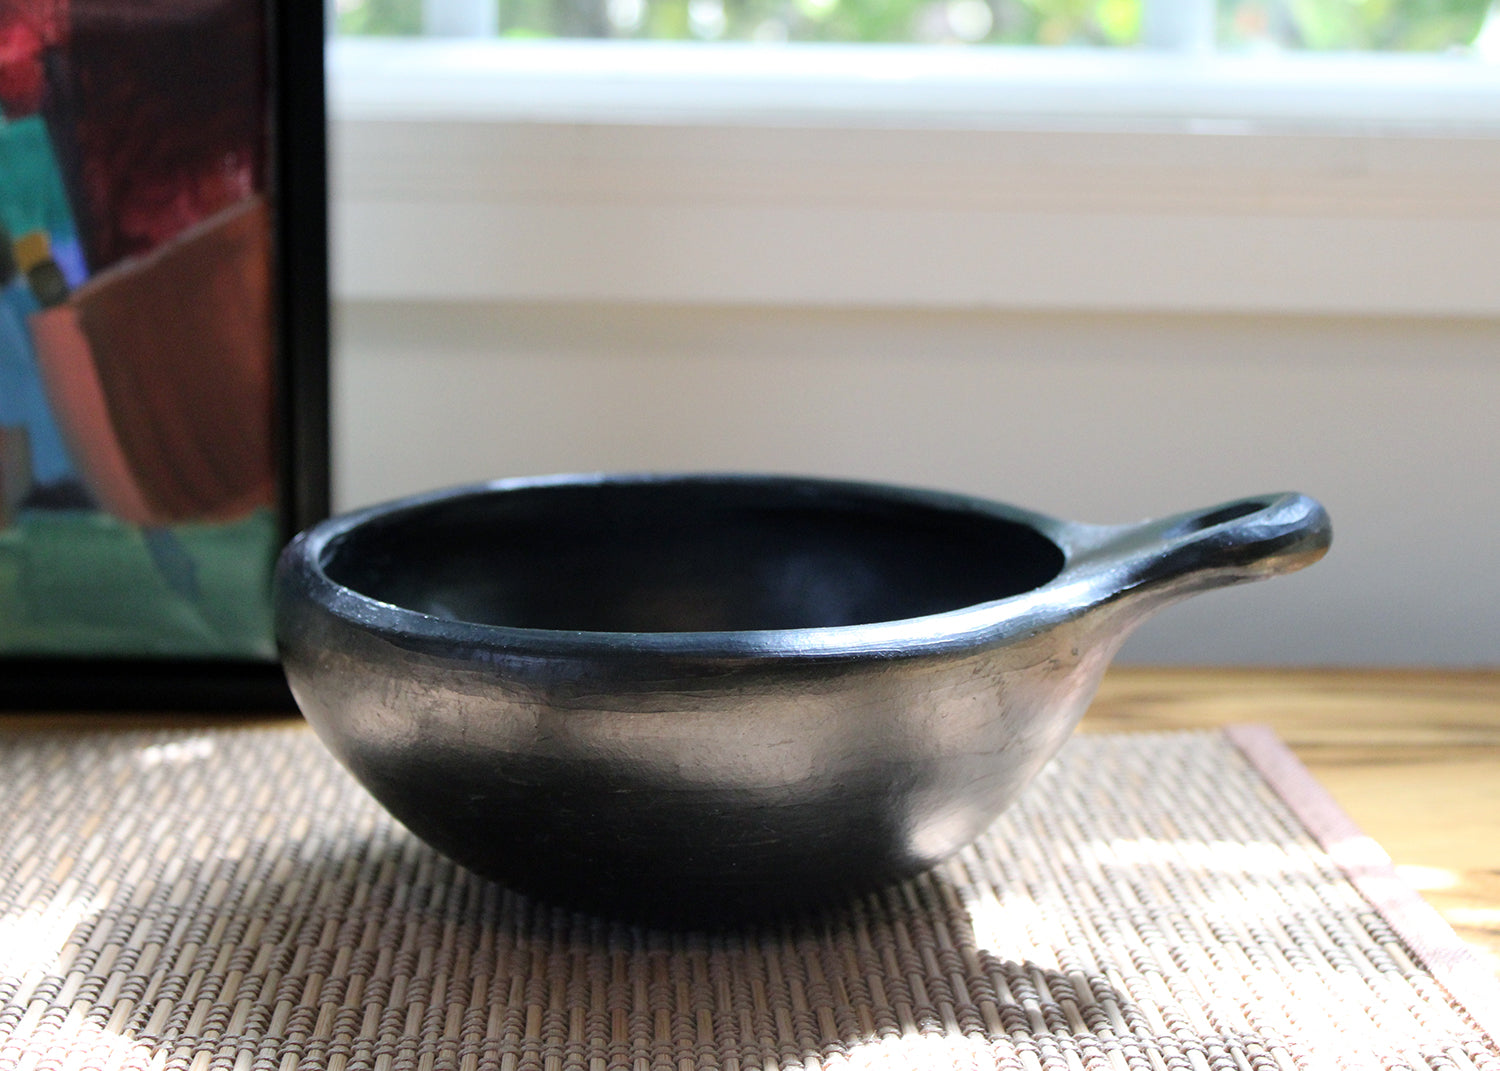  Toque Blanche Chamba Black Clay Soup Pot with Handles